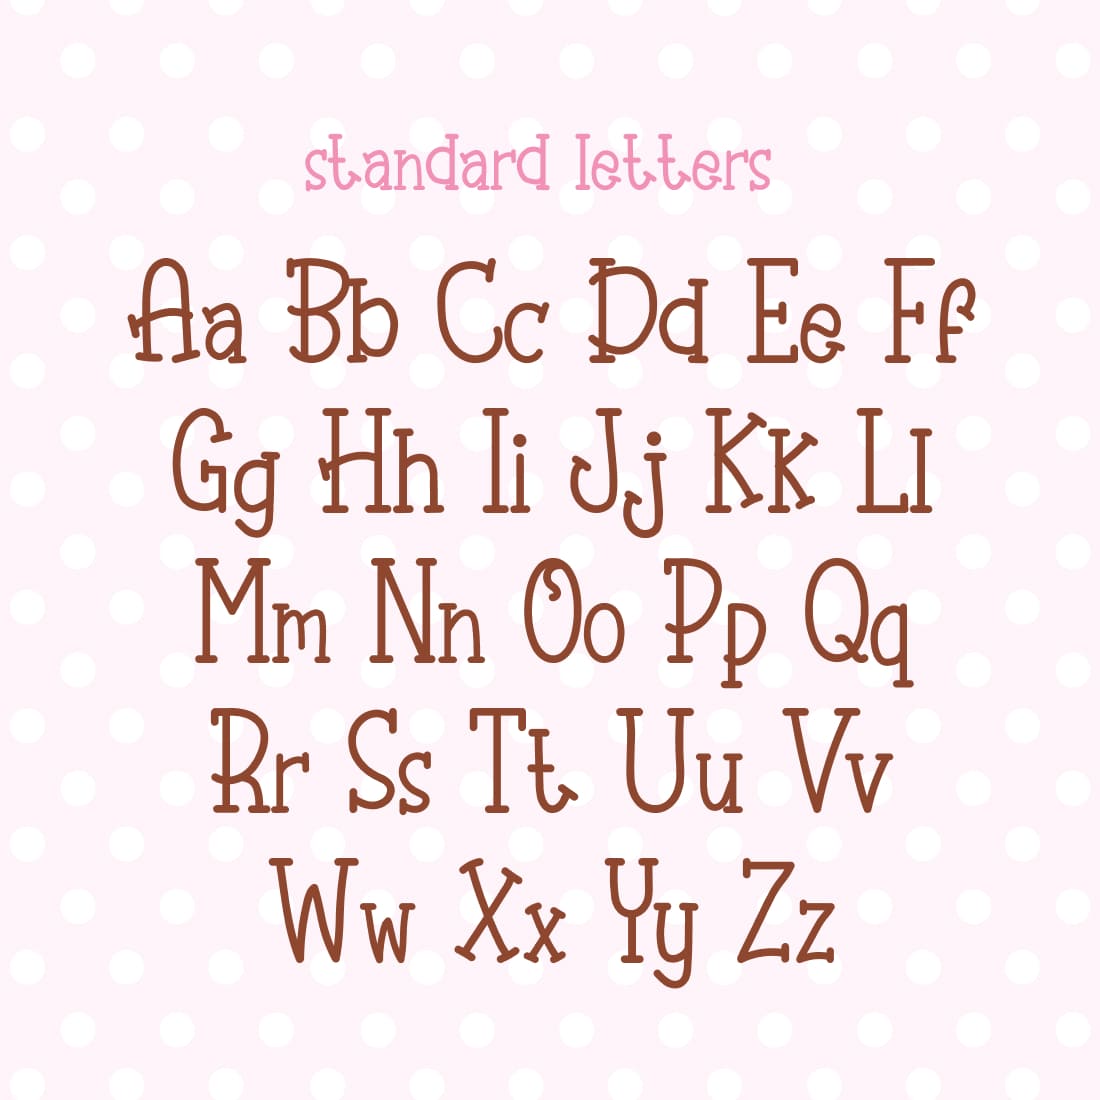 MasterBundles Free Ice Cream Cake Font Cover with Standart Letters.